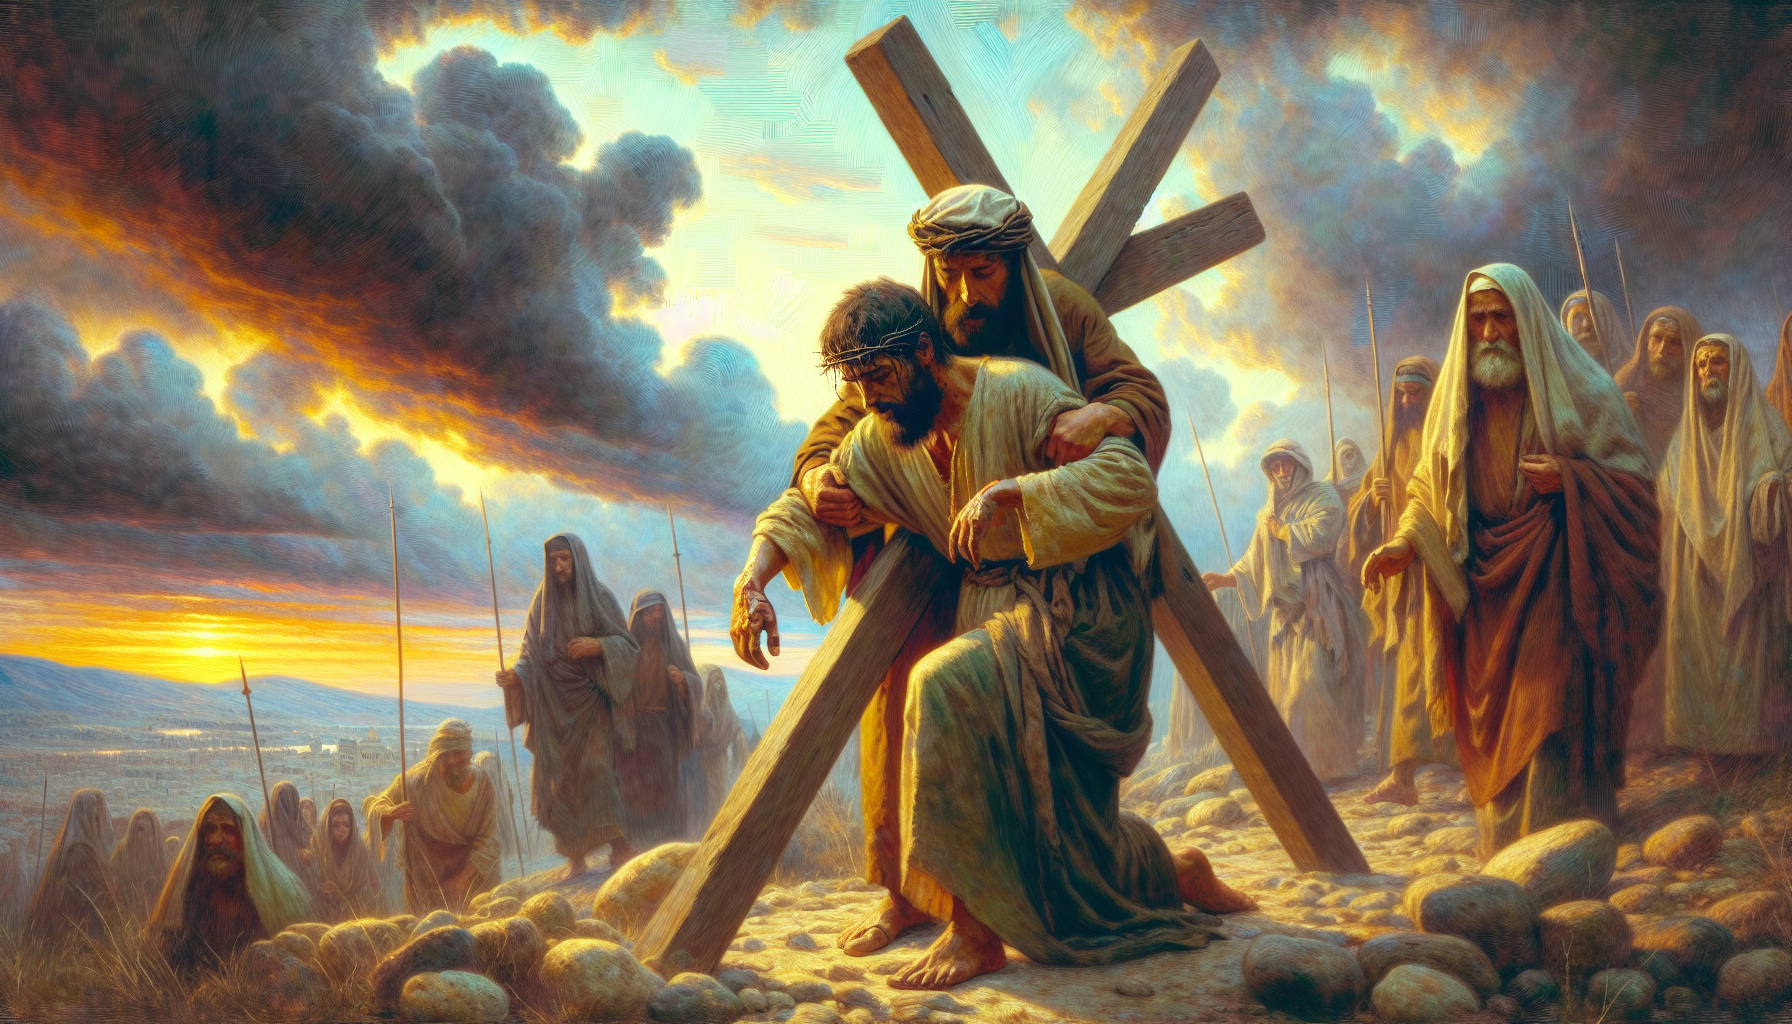 Evocative painting of Simon of Cyrene aiding Jesus with the cross on the path to Calvary, capturing a poignant moment of struggle and compassion under a dramatic, cloudy sky in a bustling biblical-era